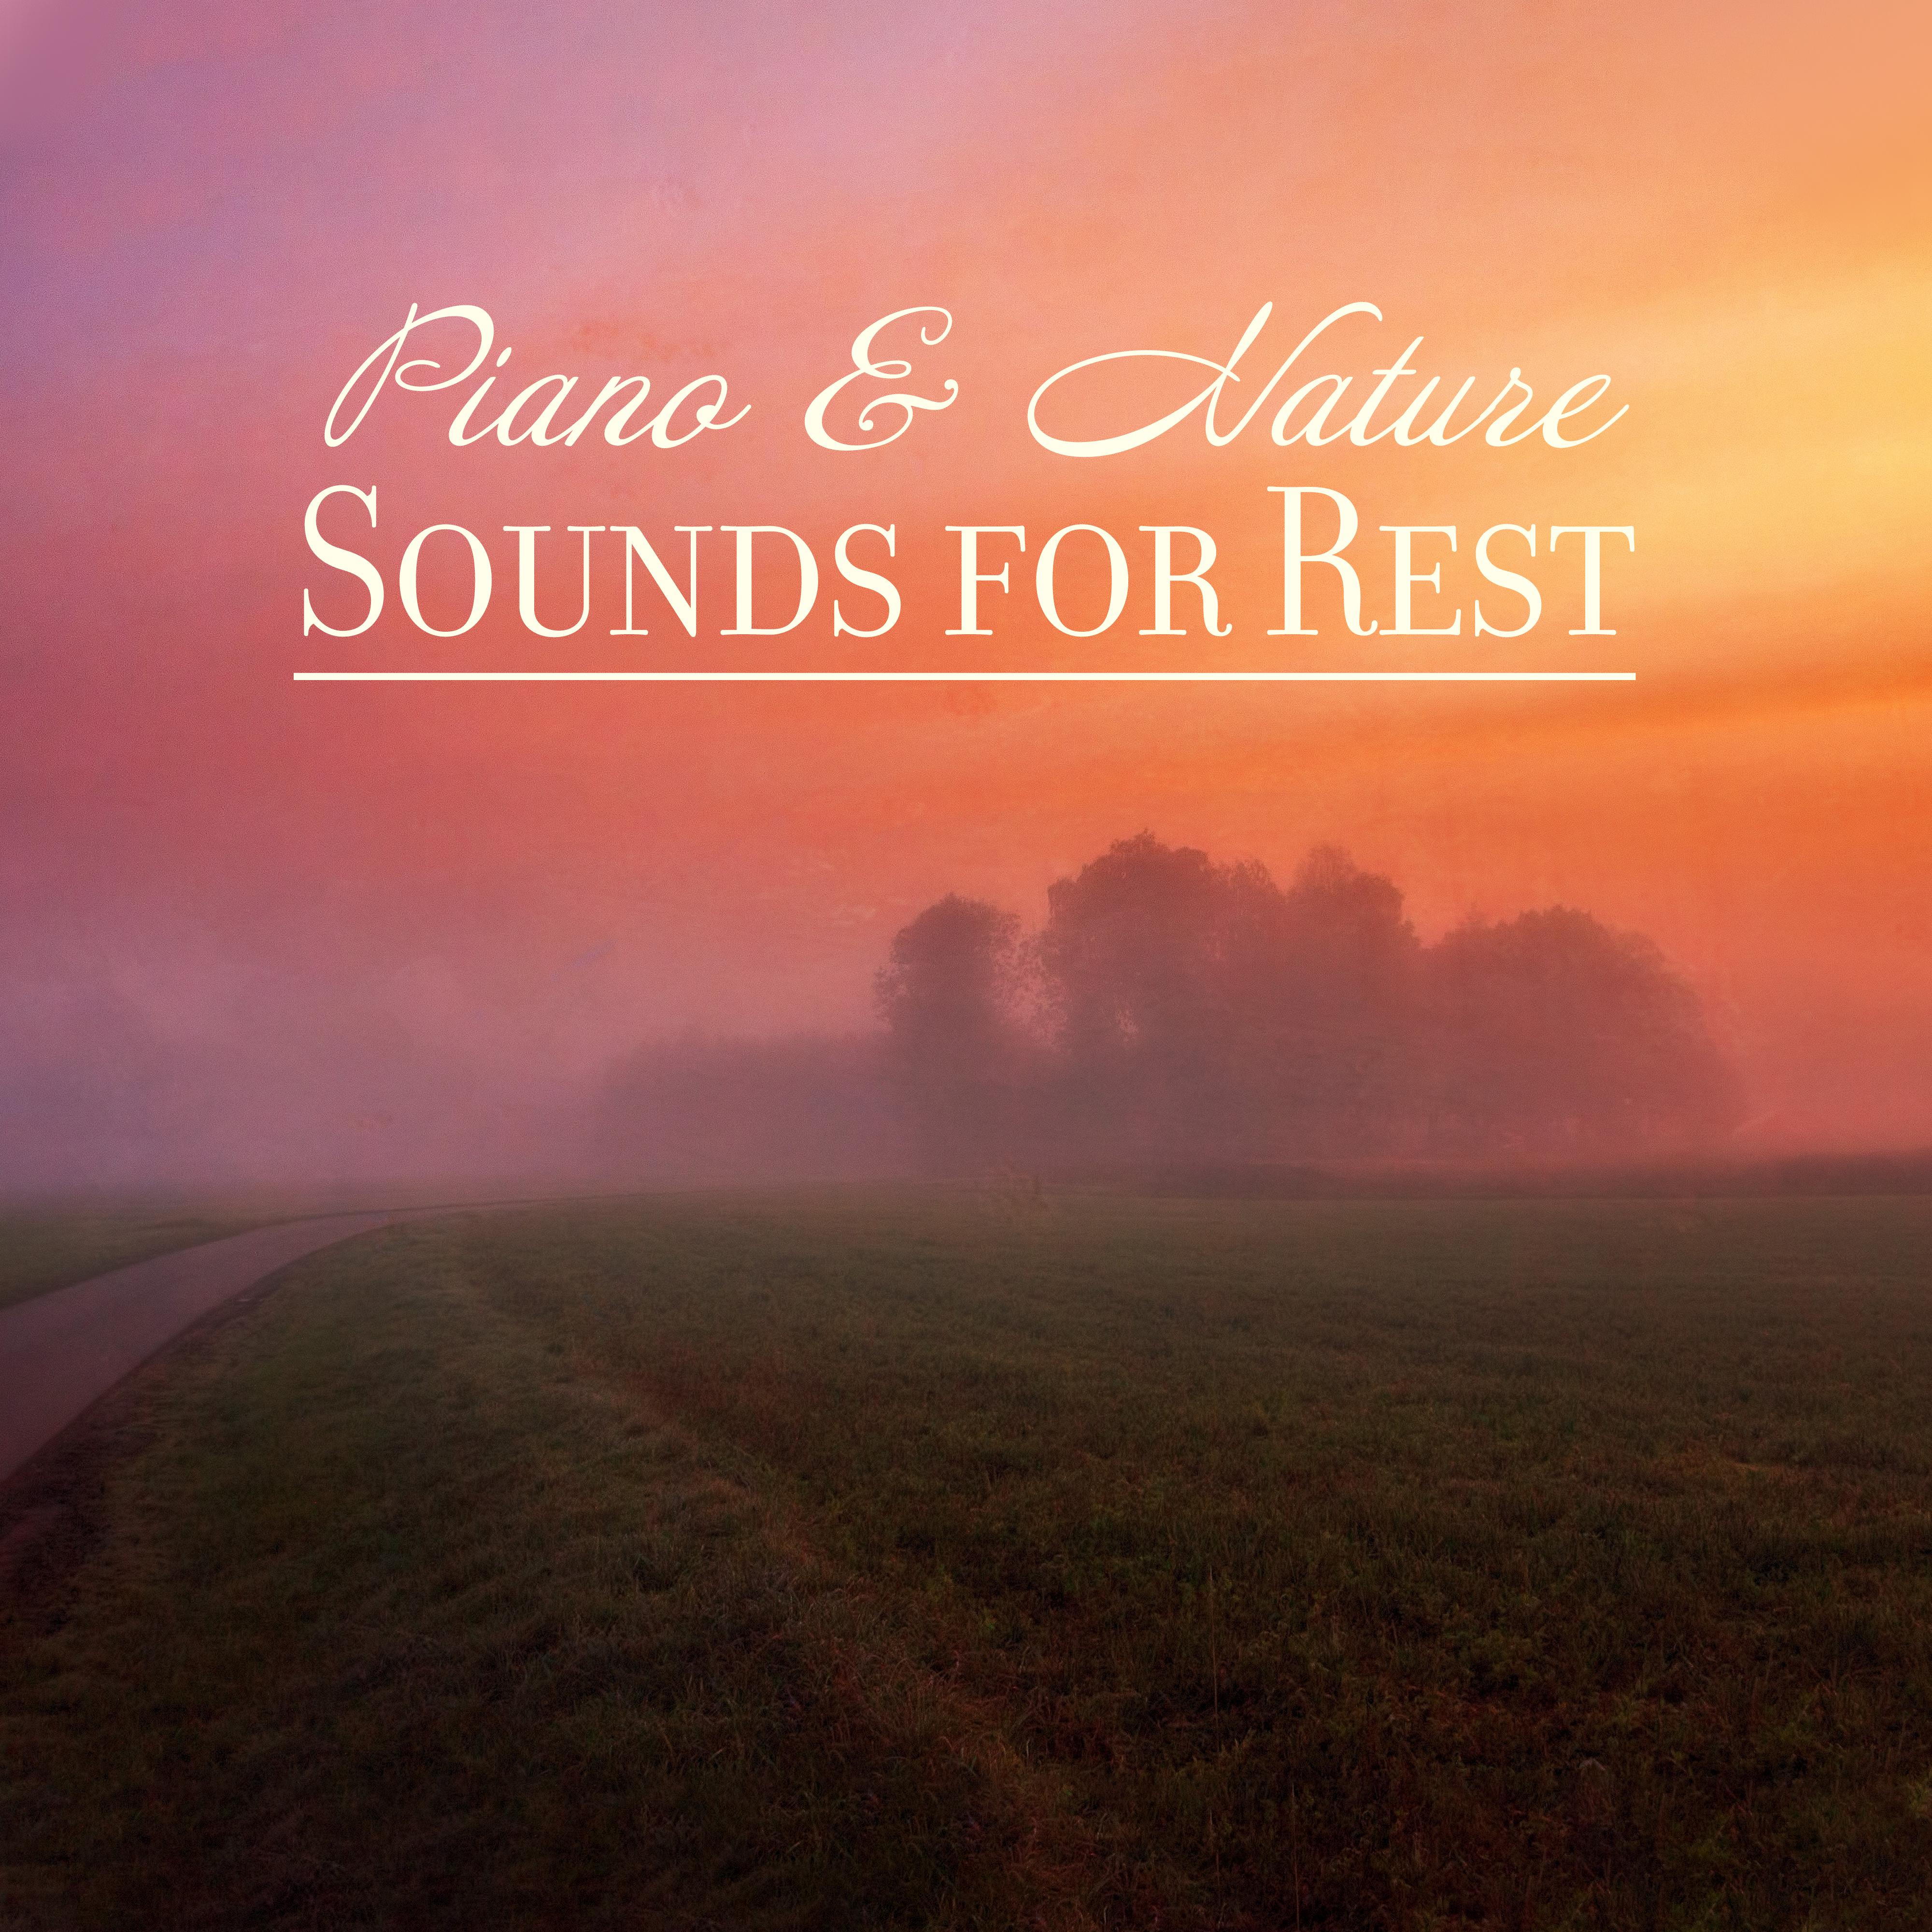 Piano & Nature Sounds for Rest: Compilation of 2019 New Age Most Relaxing Nature Music, Soothing Sounds of Forest, Water, Birds & Many More, Lovely Piano Melodies